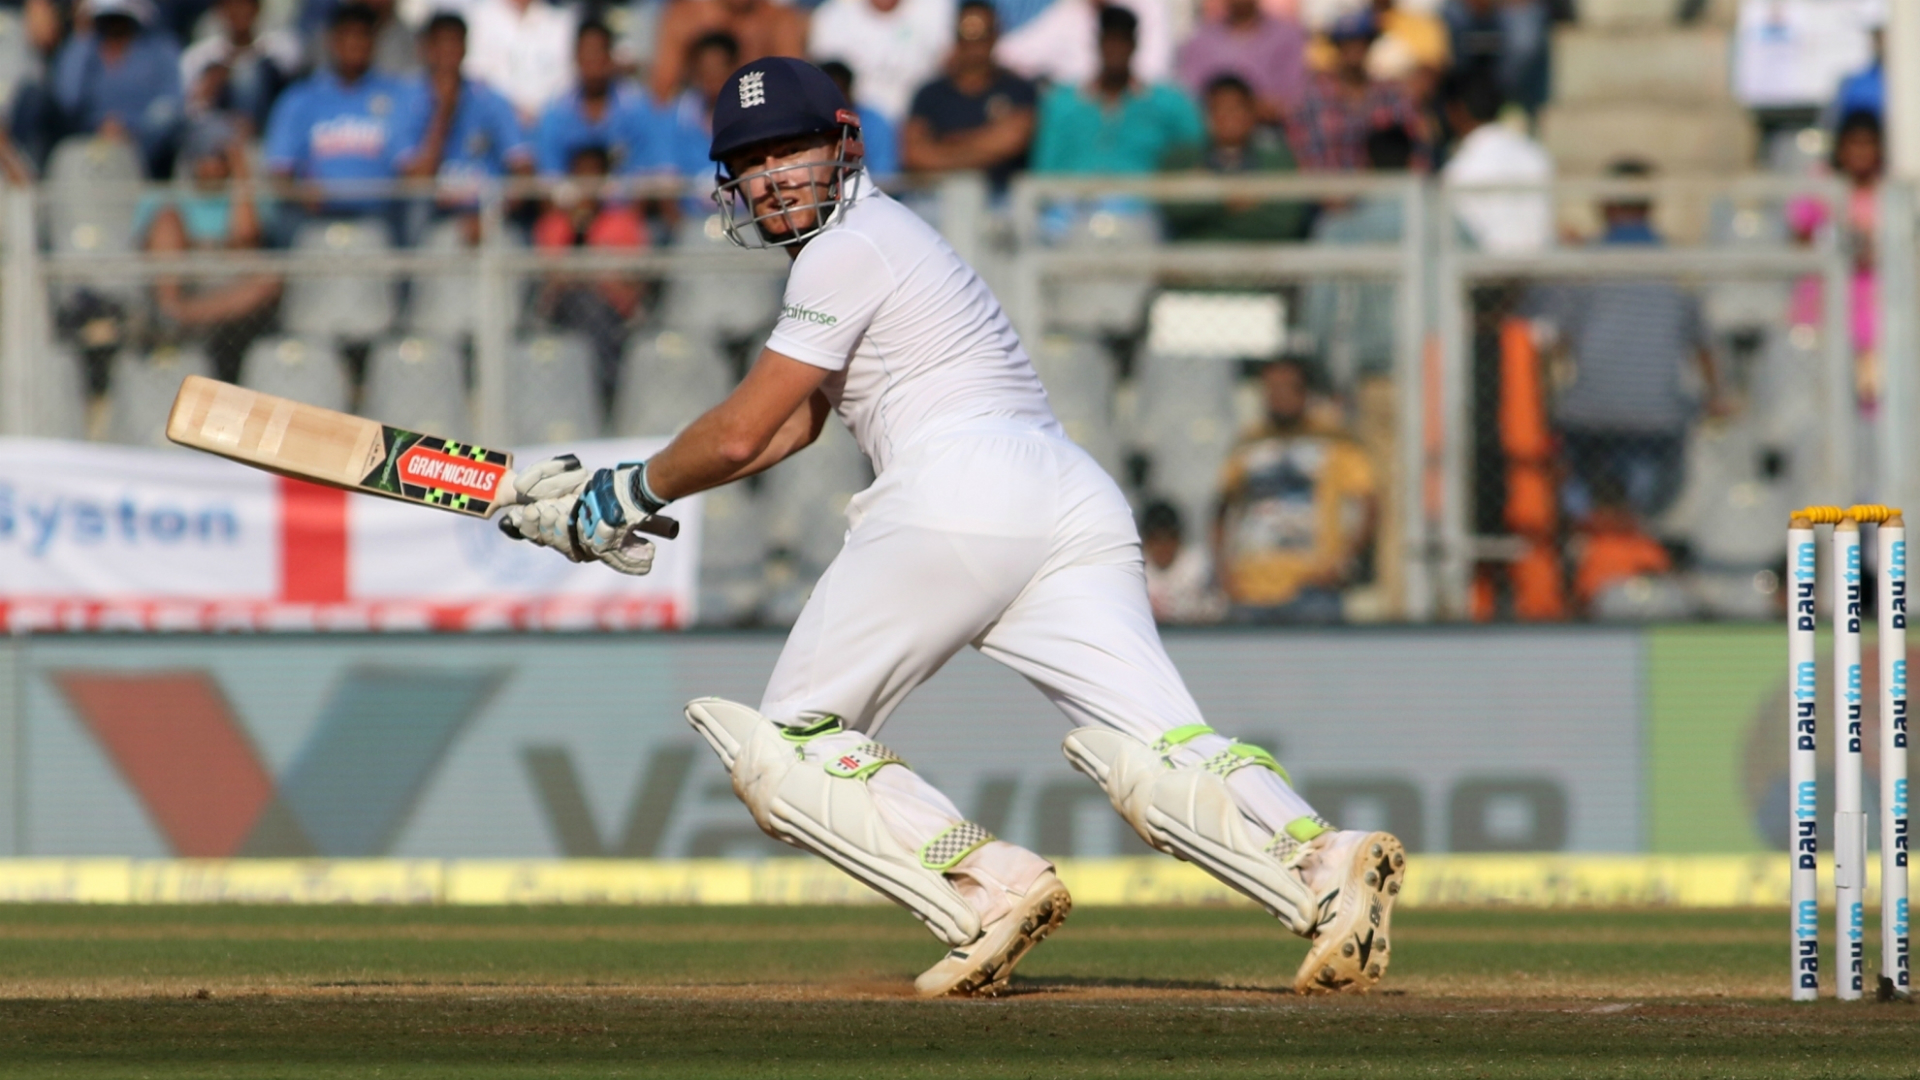 England will have to make a decision on Jonny Bairstow” - Nasser